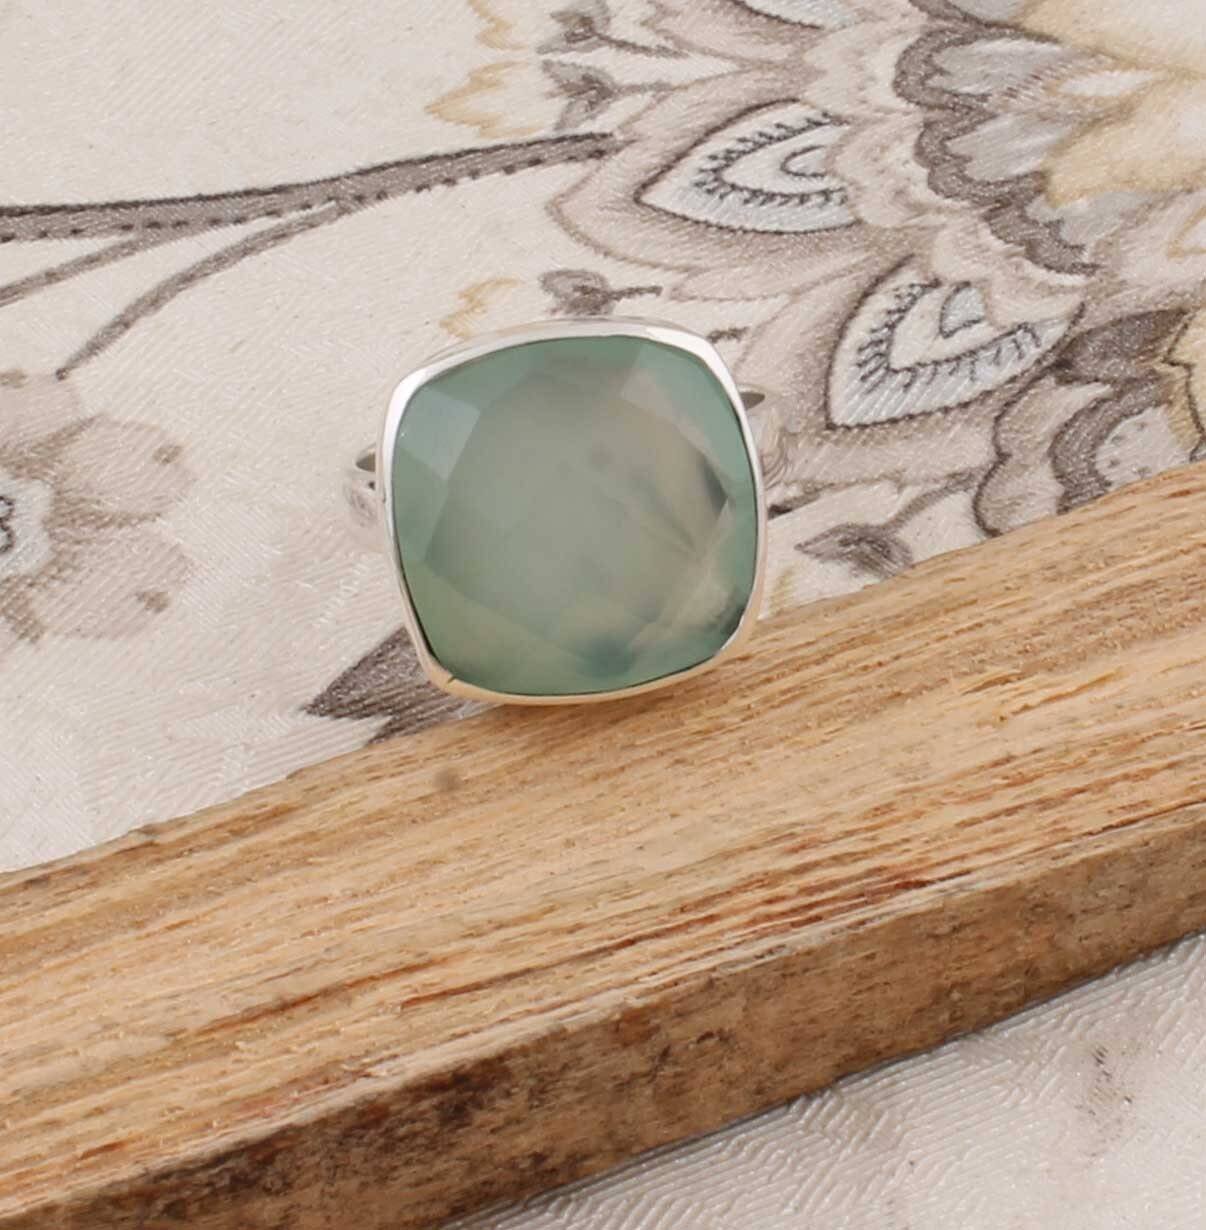 Beautiful Amazing Aqua Calci Top Quality Gemstone Ring 925-Sterling Silver Ring,Middle Finger Ring,Antique Silver Ring Gift Item Ring